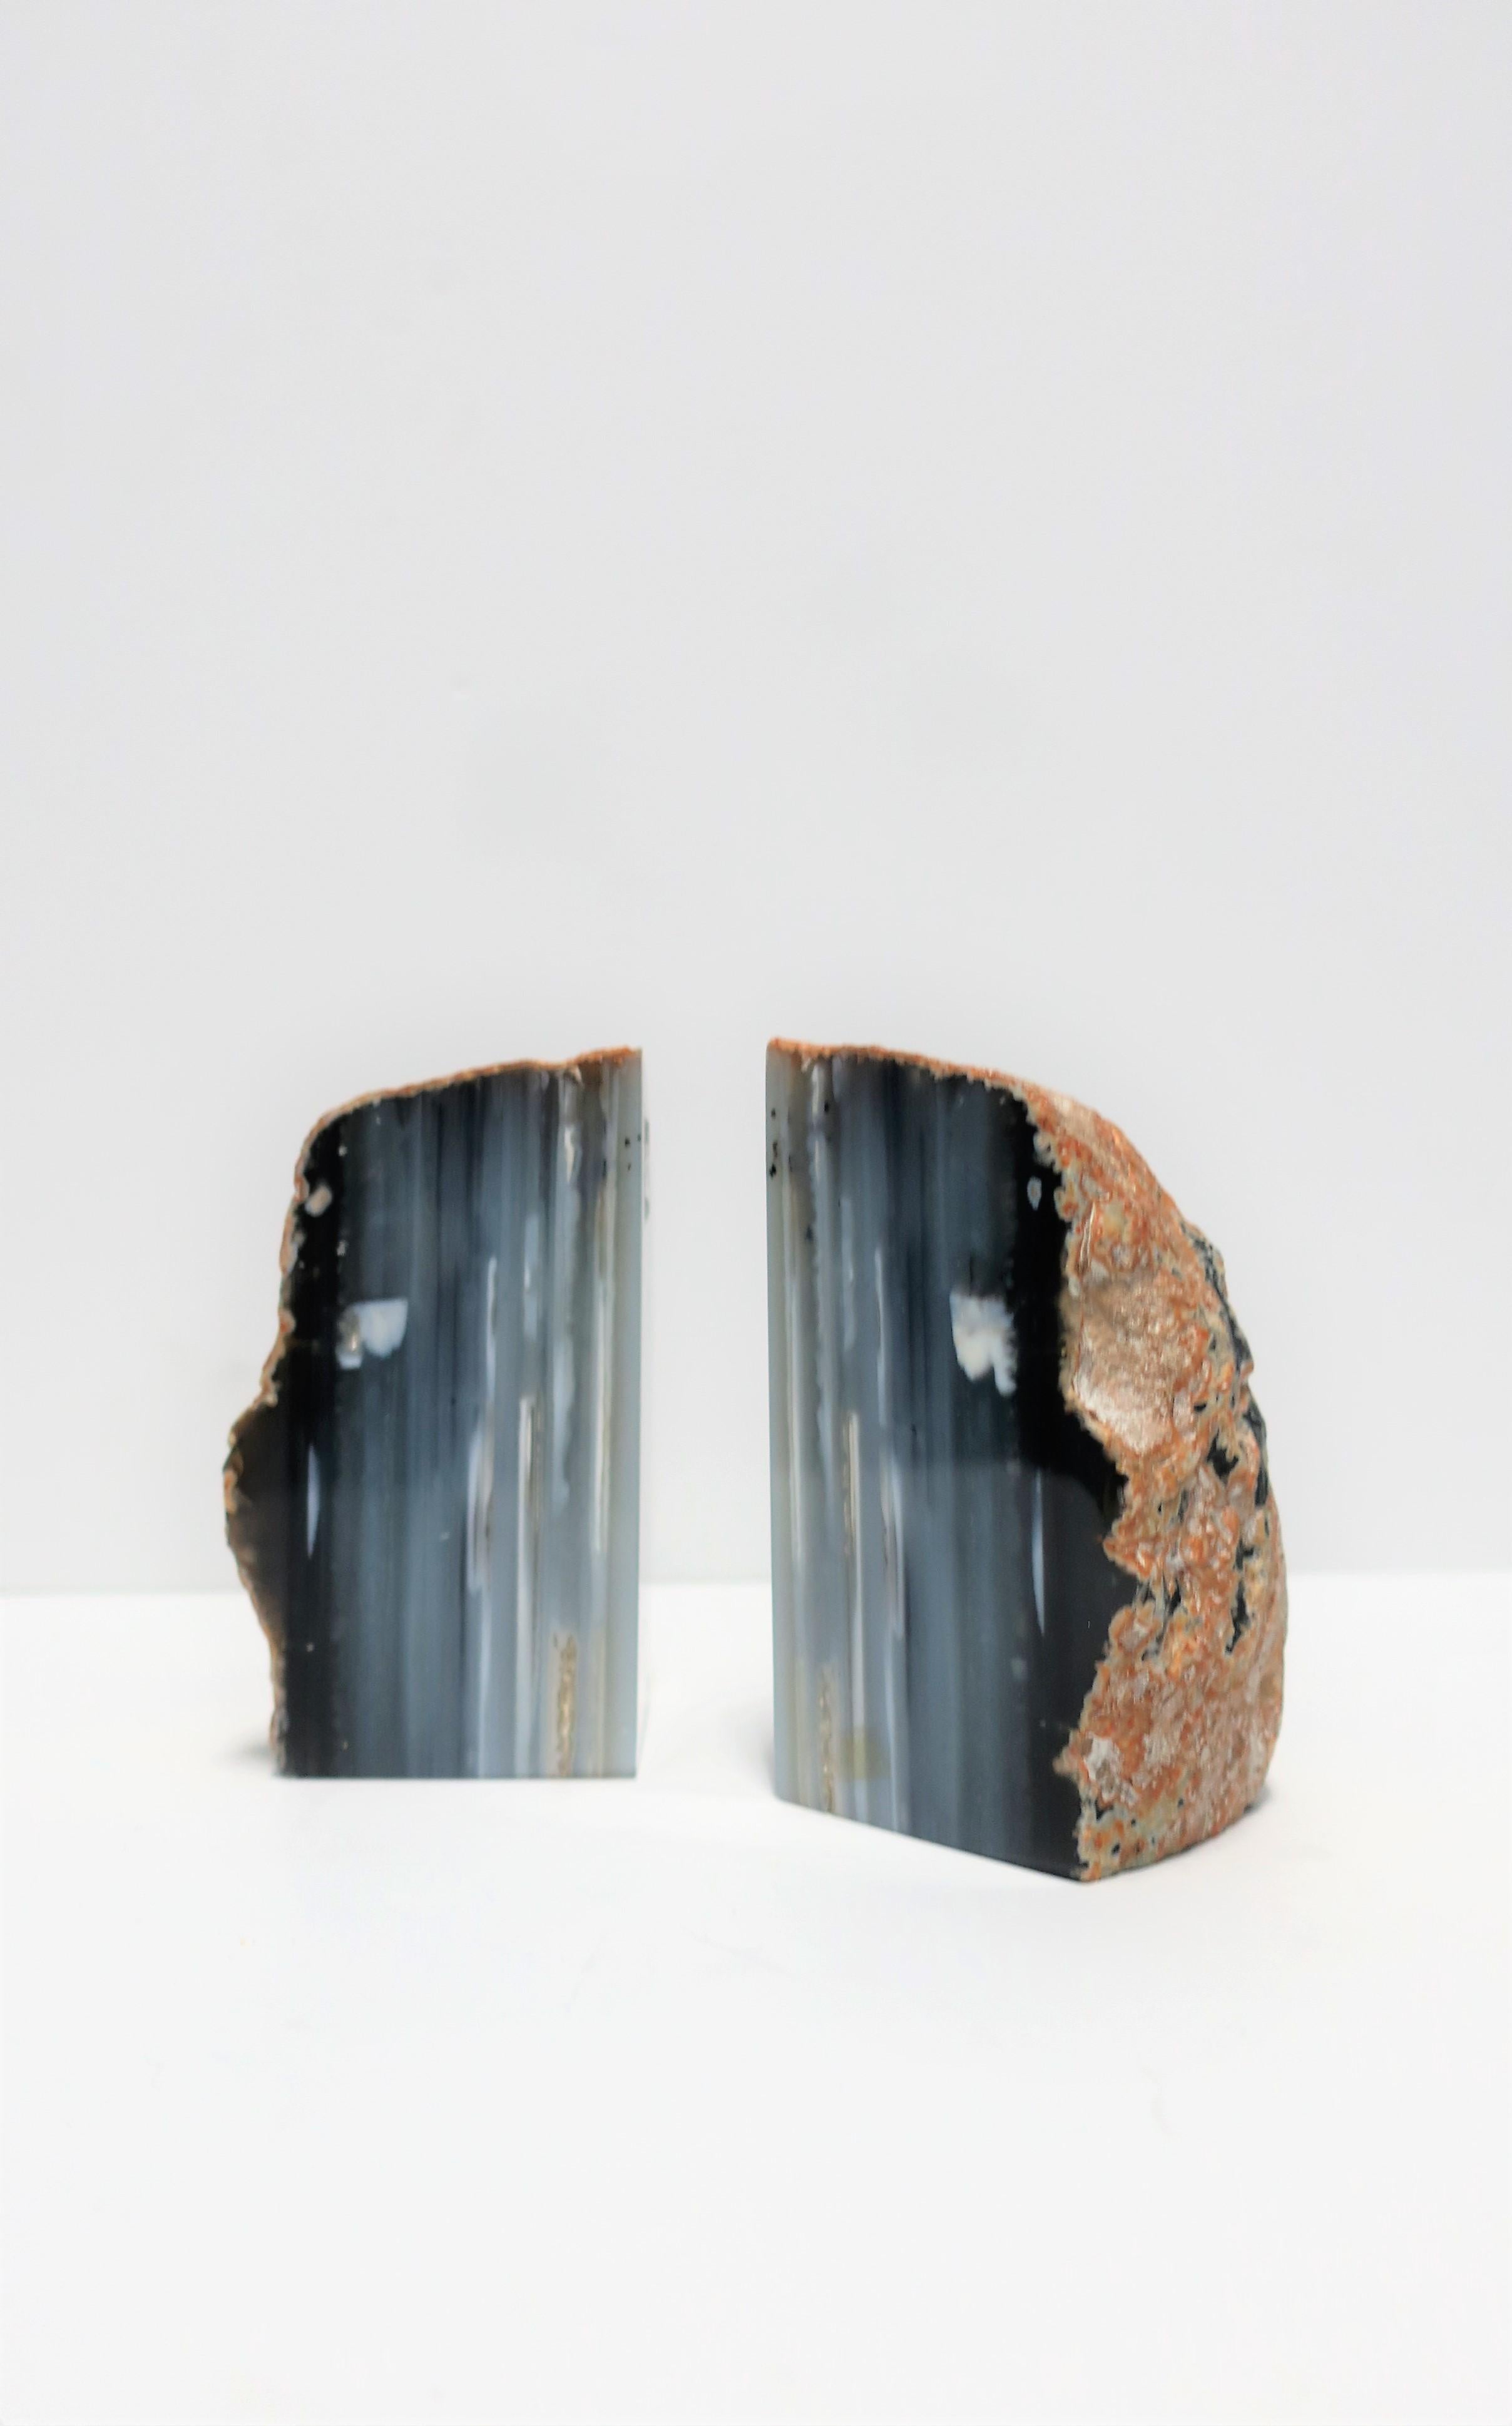 A pair of blue, grey, and white natural agate bookends or decorative objects. This agate pair can work well on a bookshelf, or as standalone decorative objects. Colors include shades of blue, grey, and white.

Each measure: 2.75